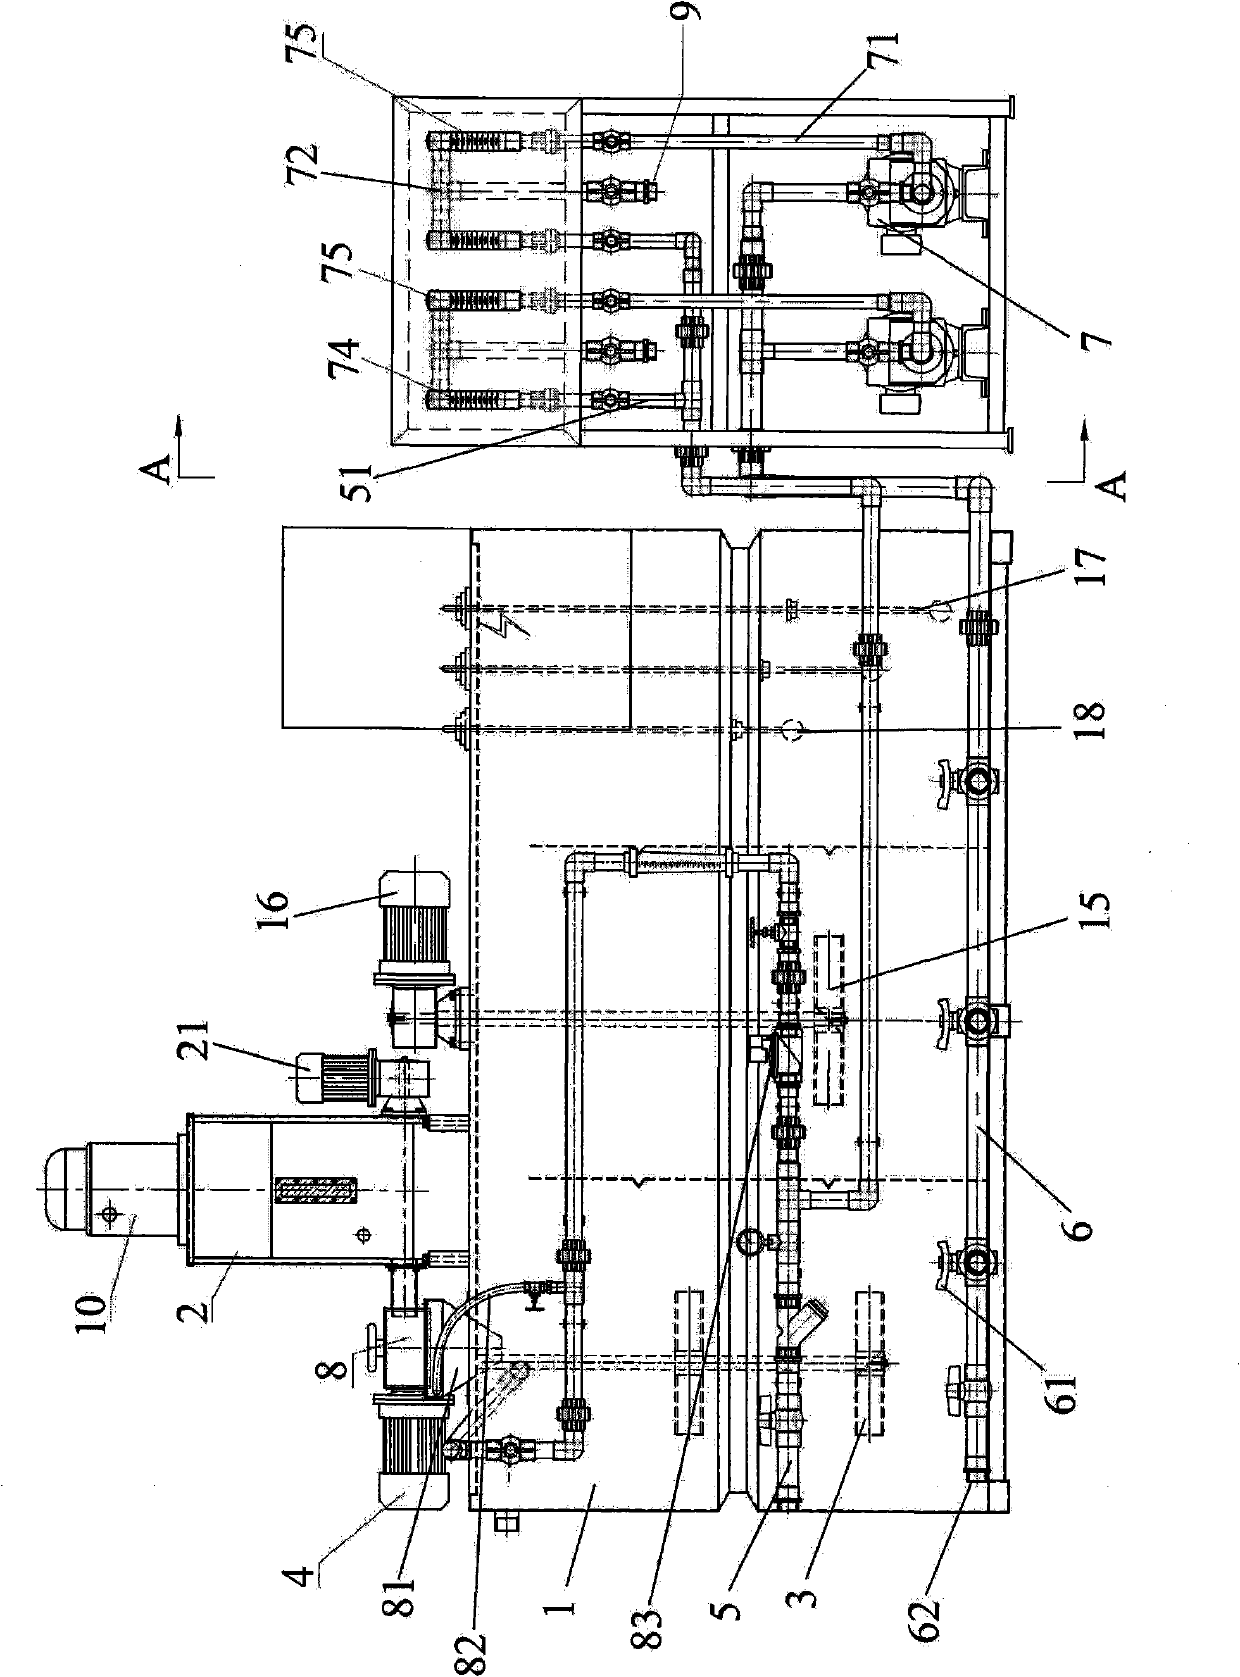 Automatic dosing device for sewage treatment